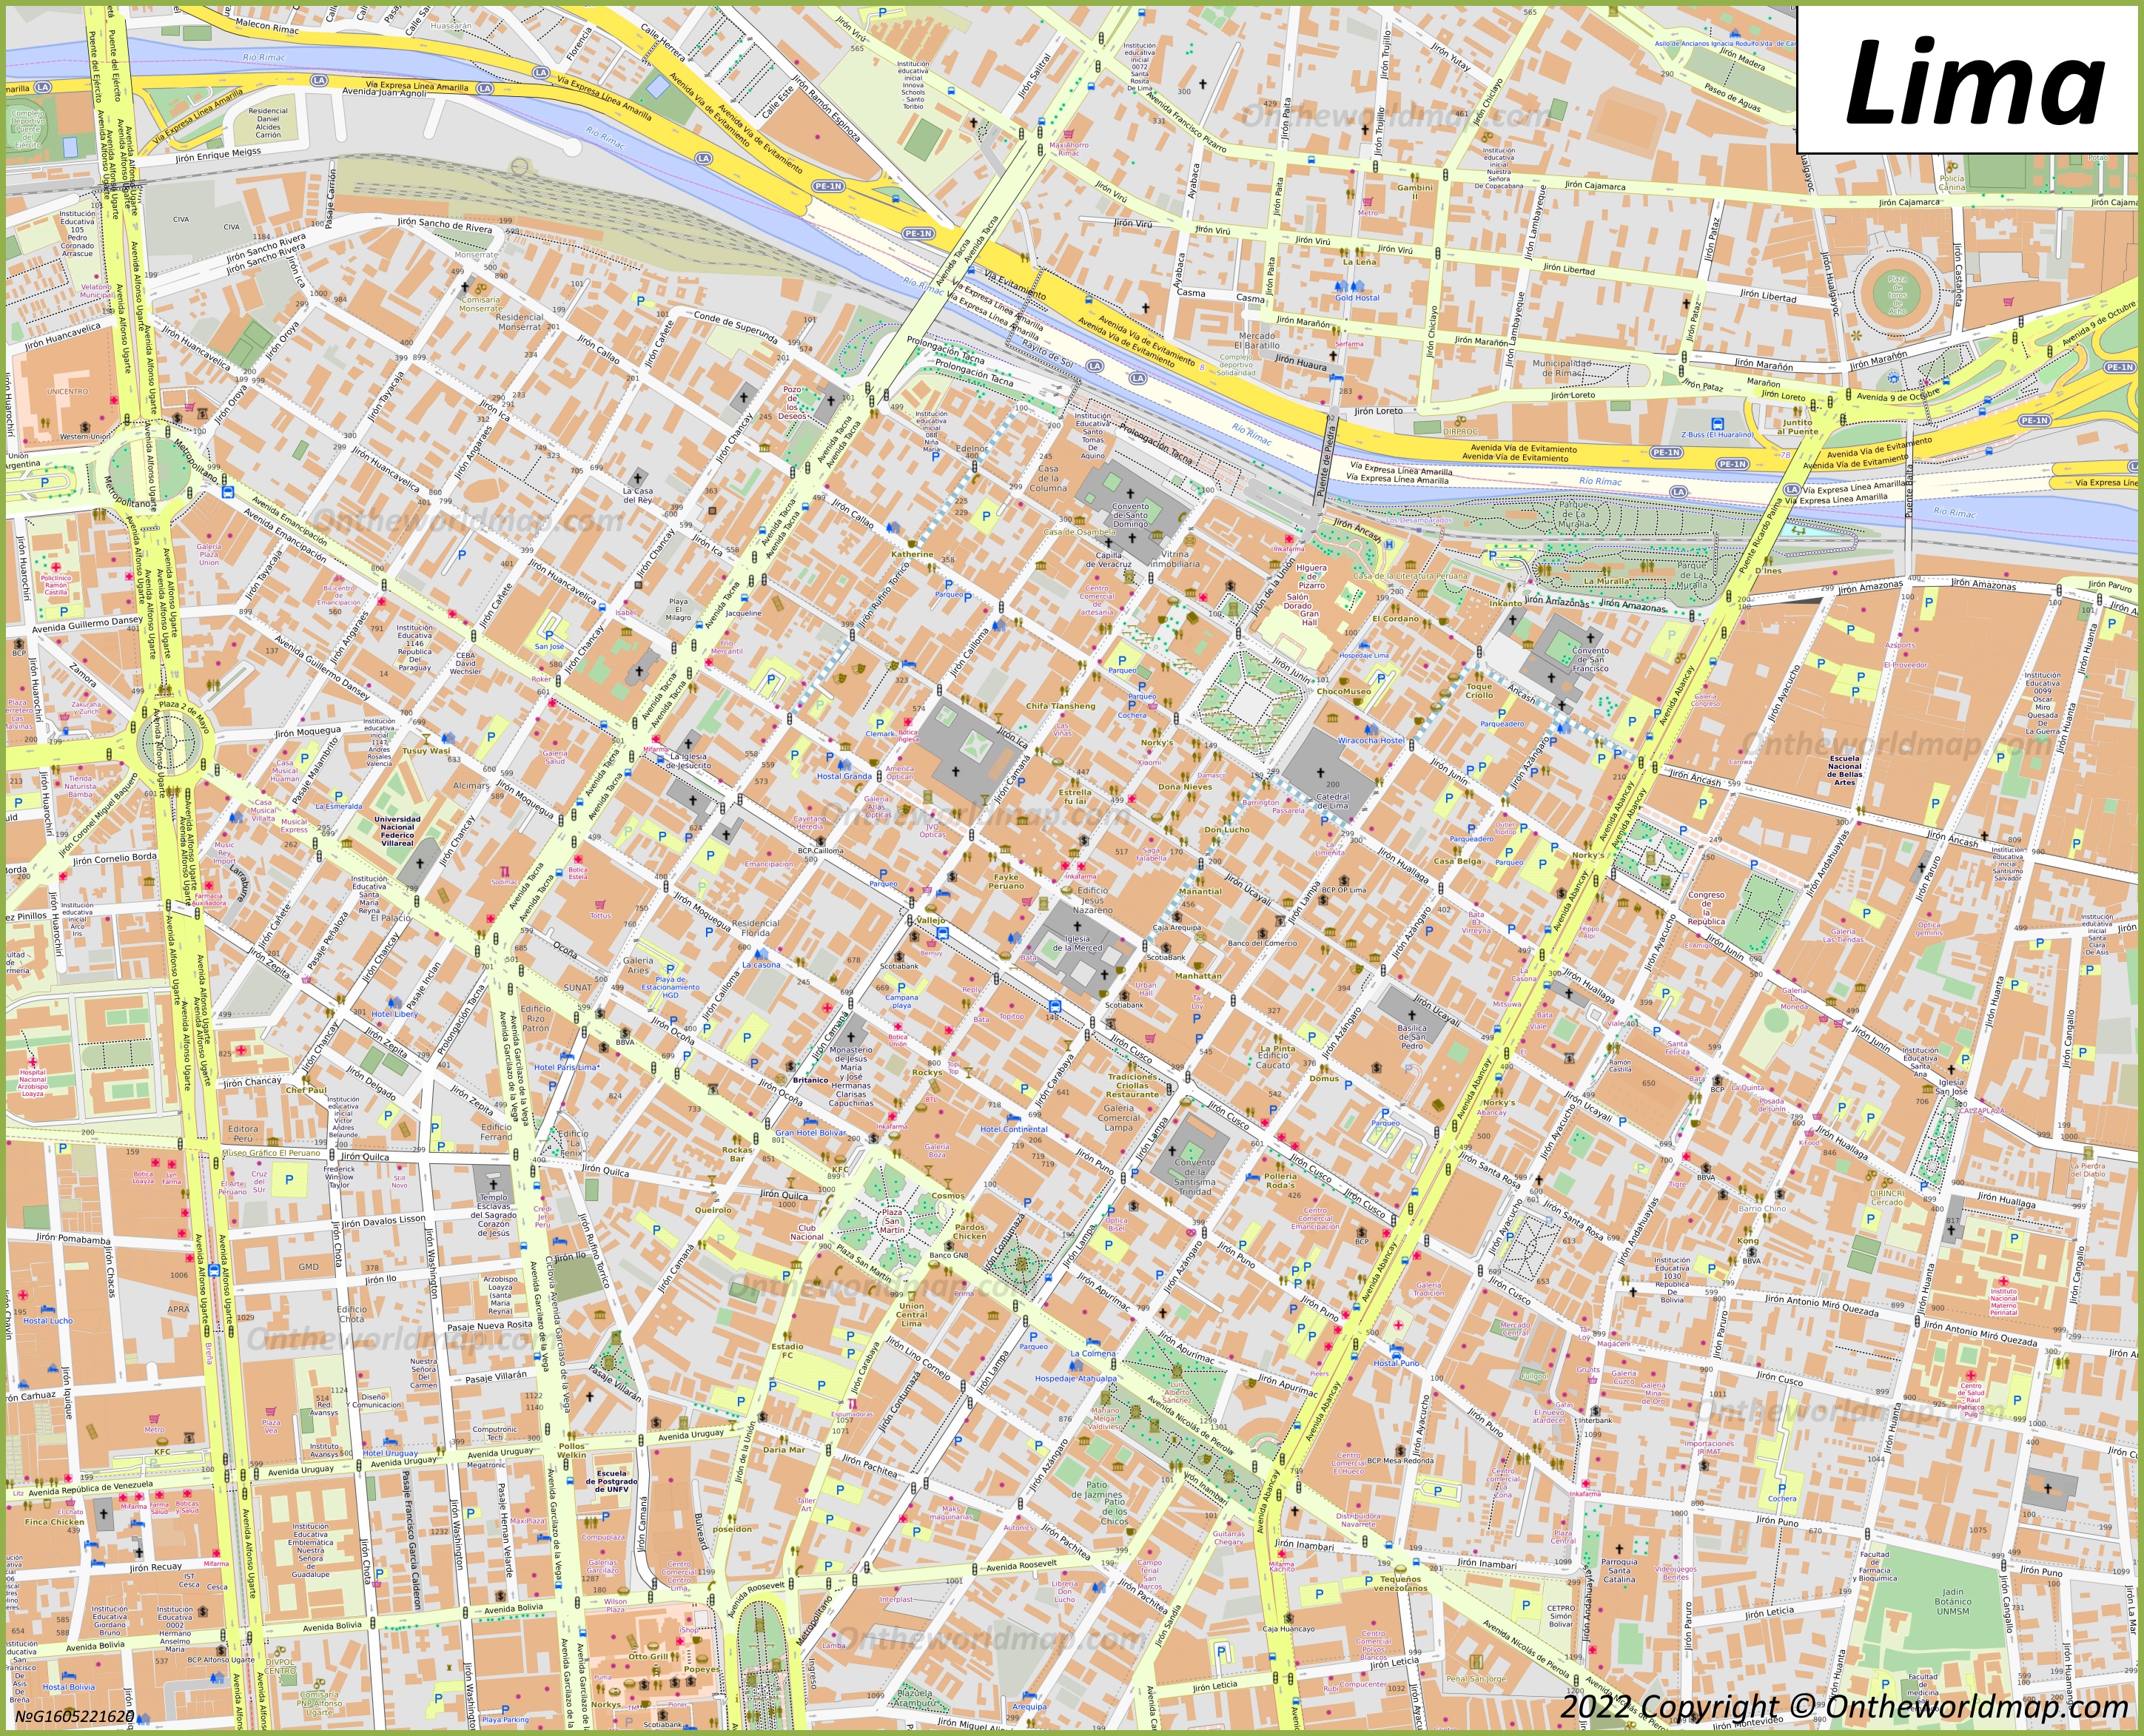 Lima Old Town Map